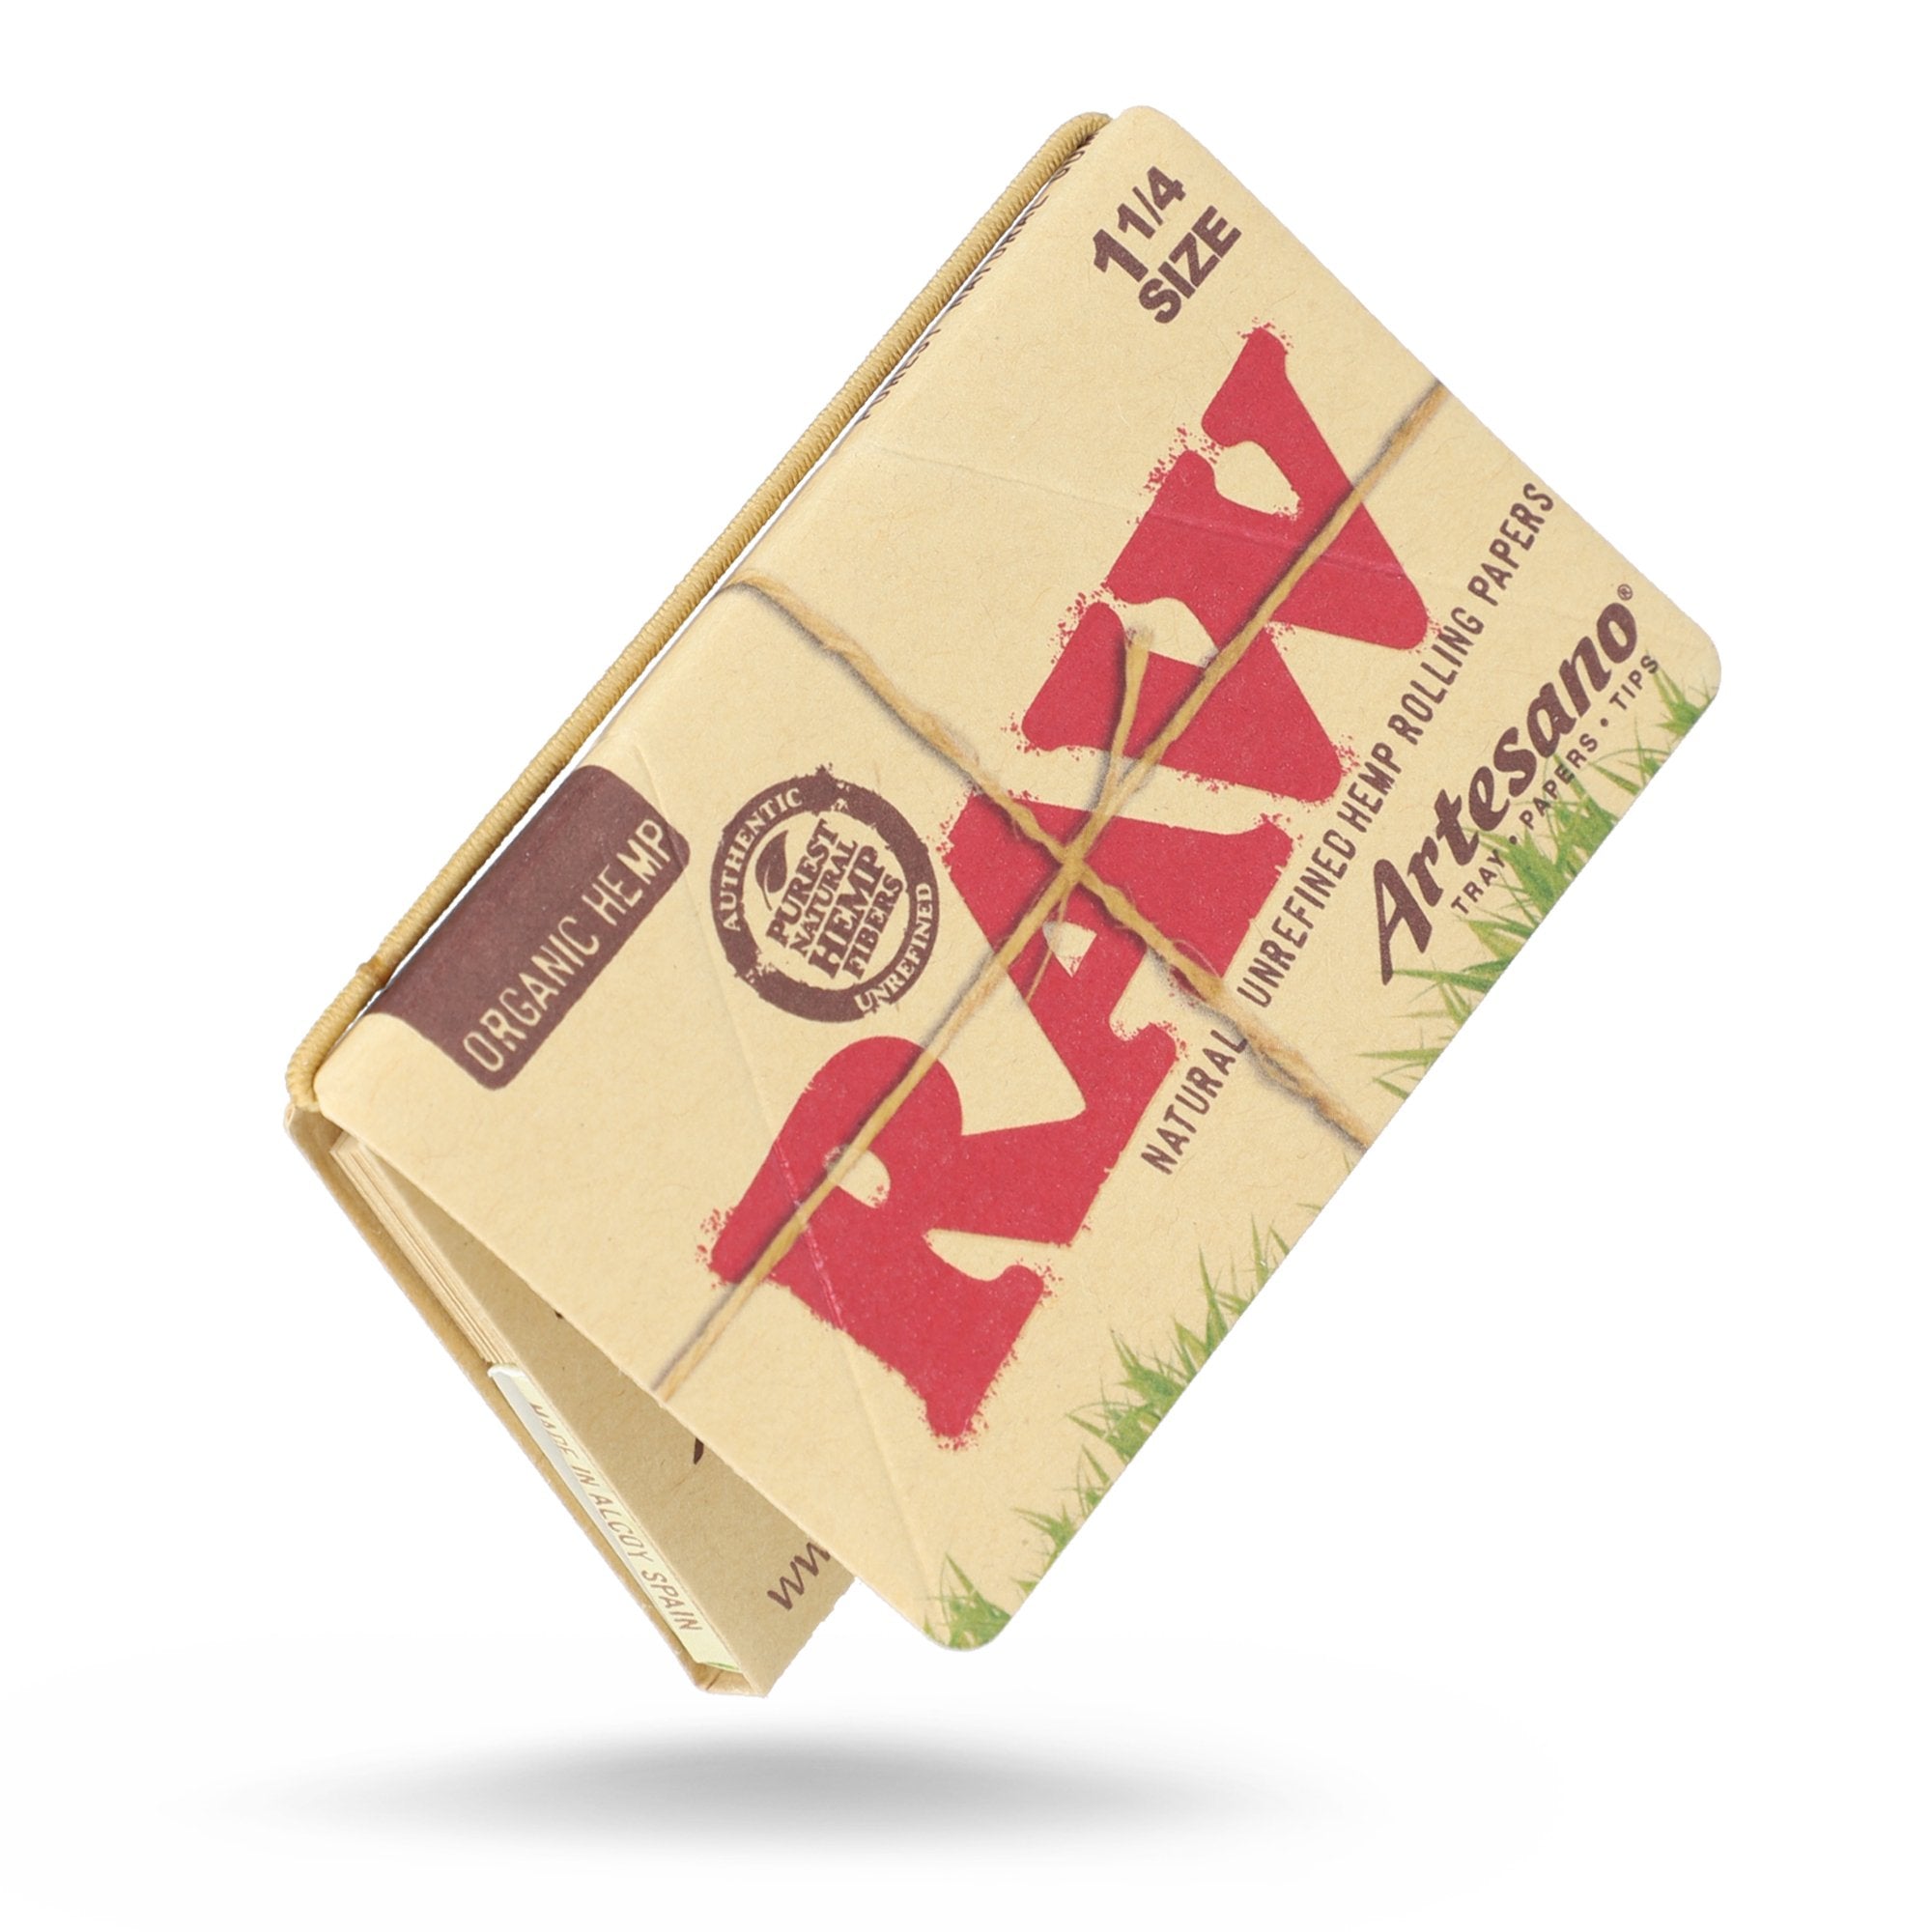 RAW Organic Hemp Artesano 1 1/4 Rolling Papers Rolling Papers WAR00363-1/15 esd-official